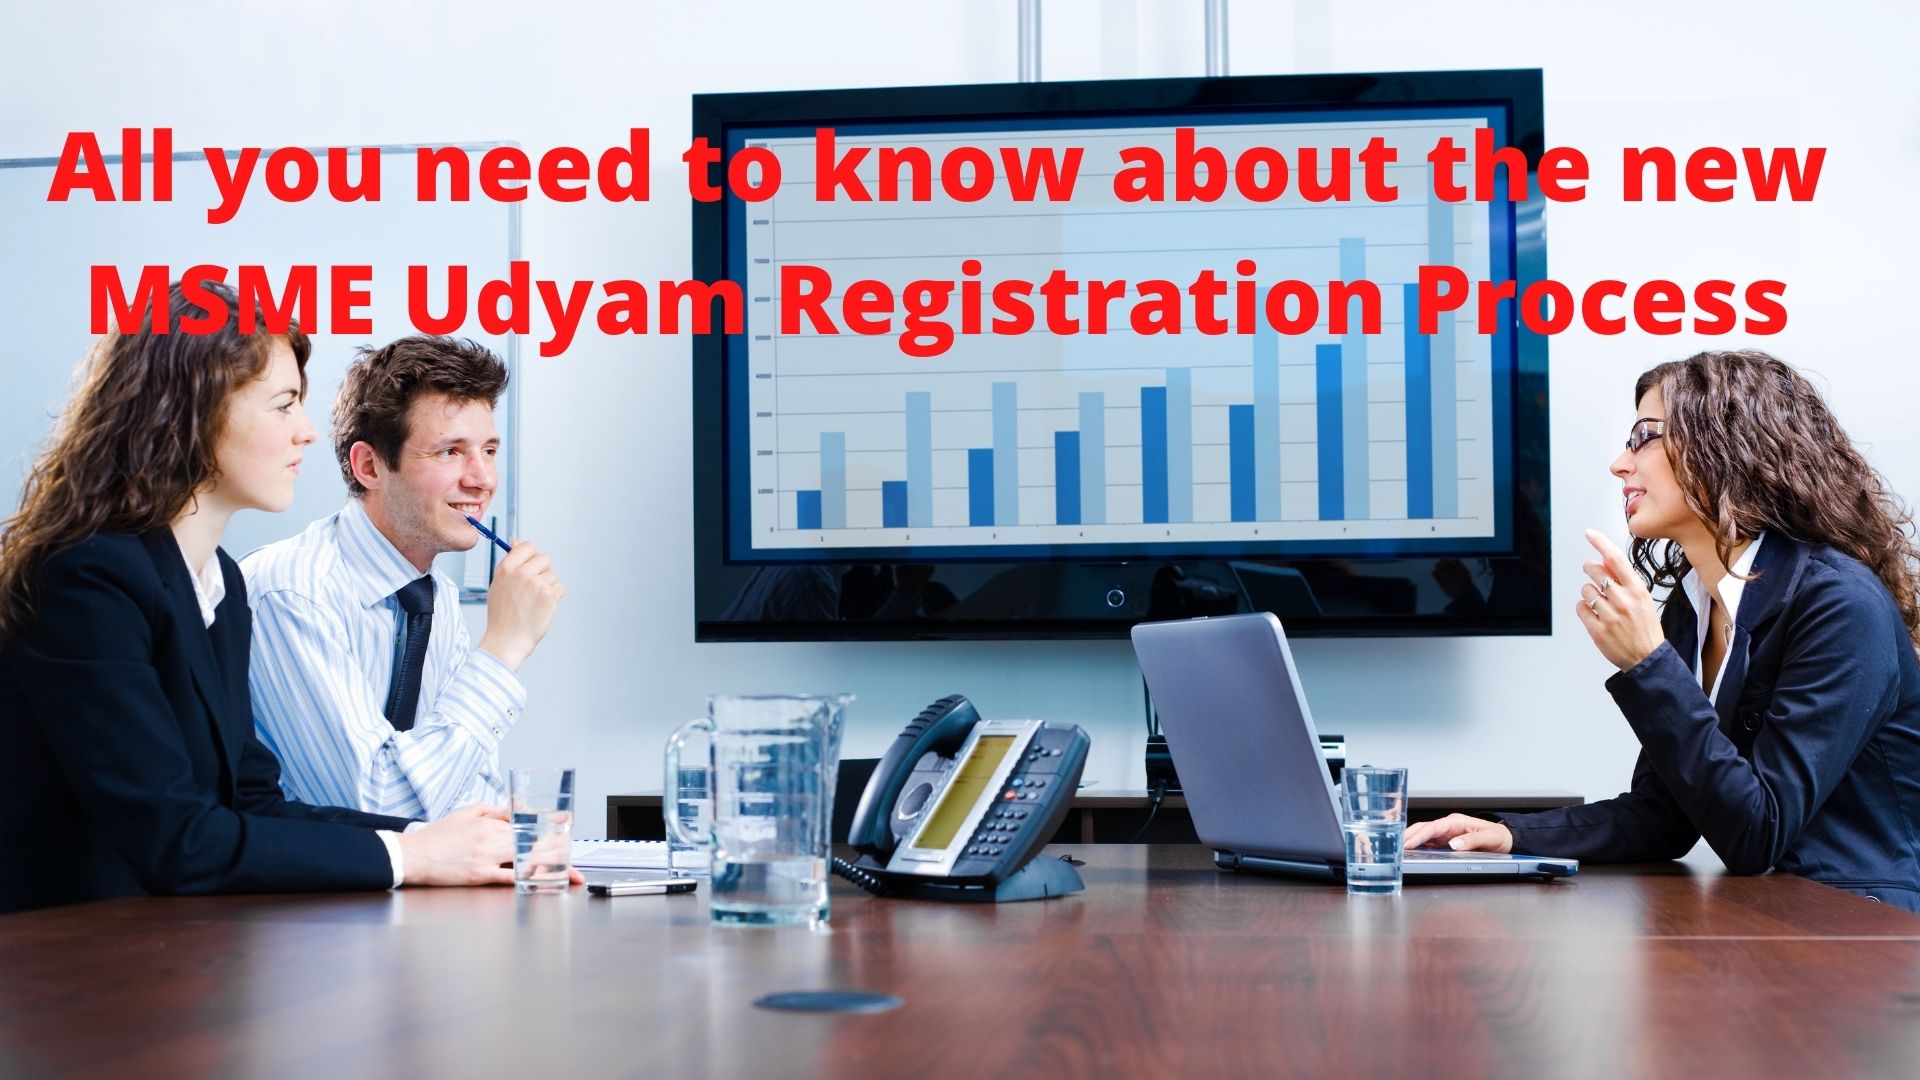 All you need to know about the new MSME Udyam Registration Process